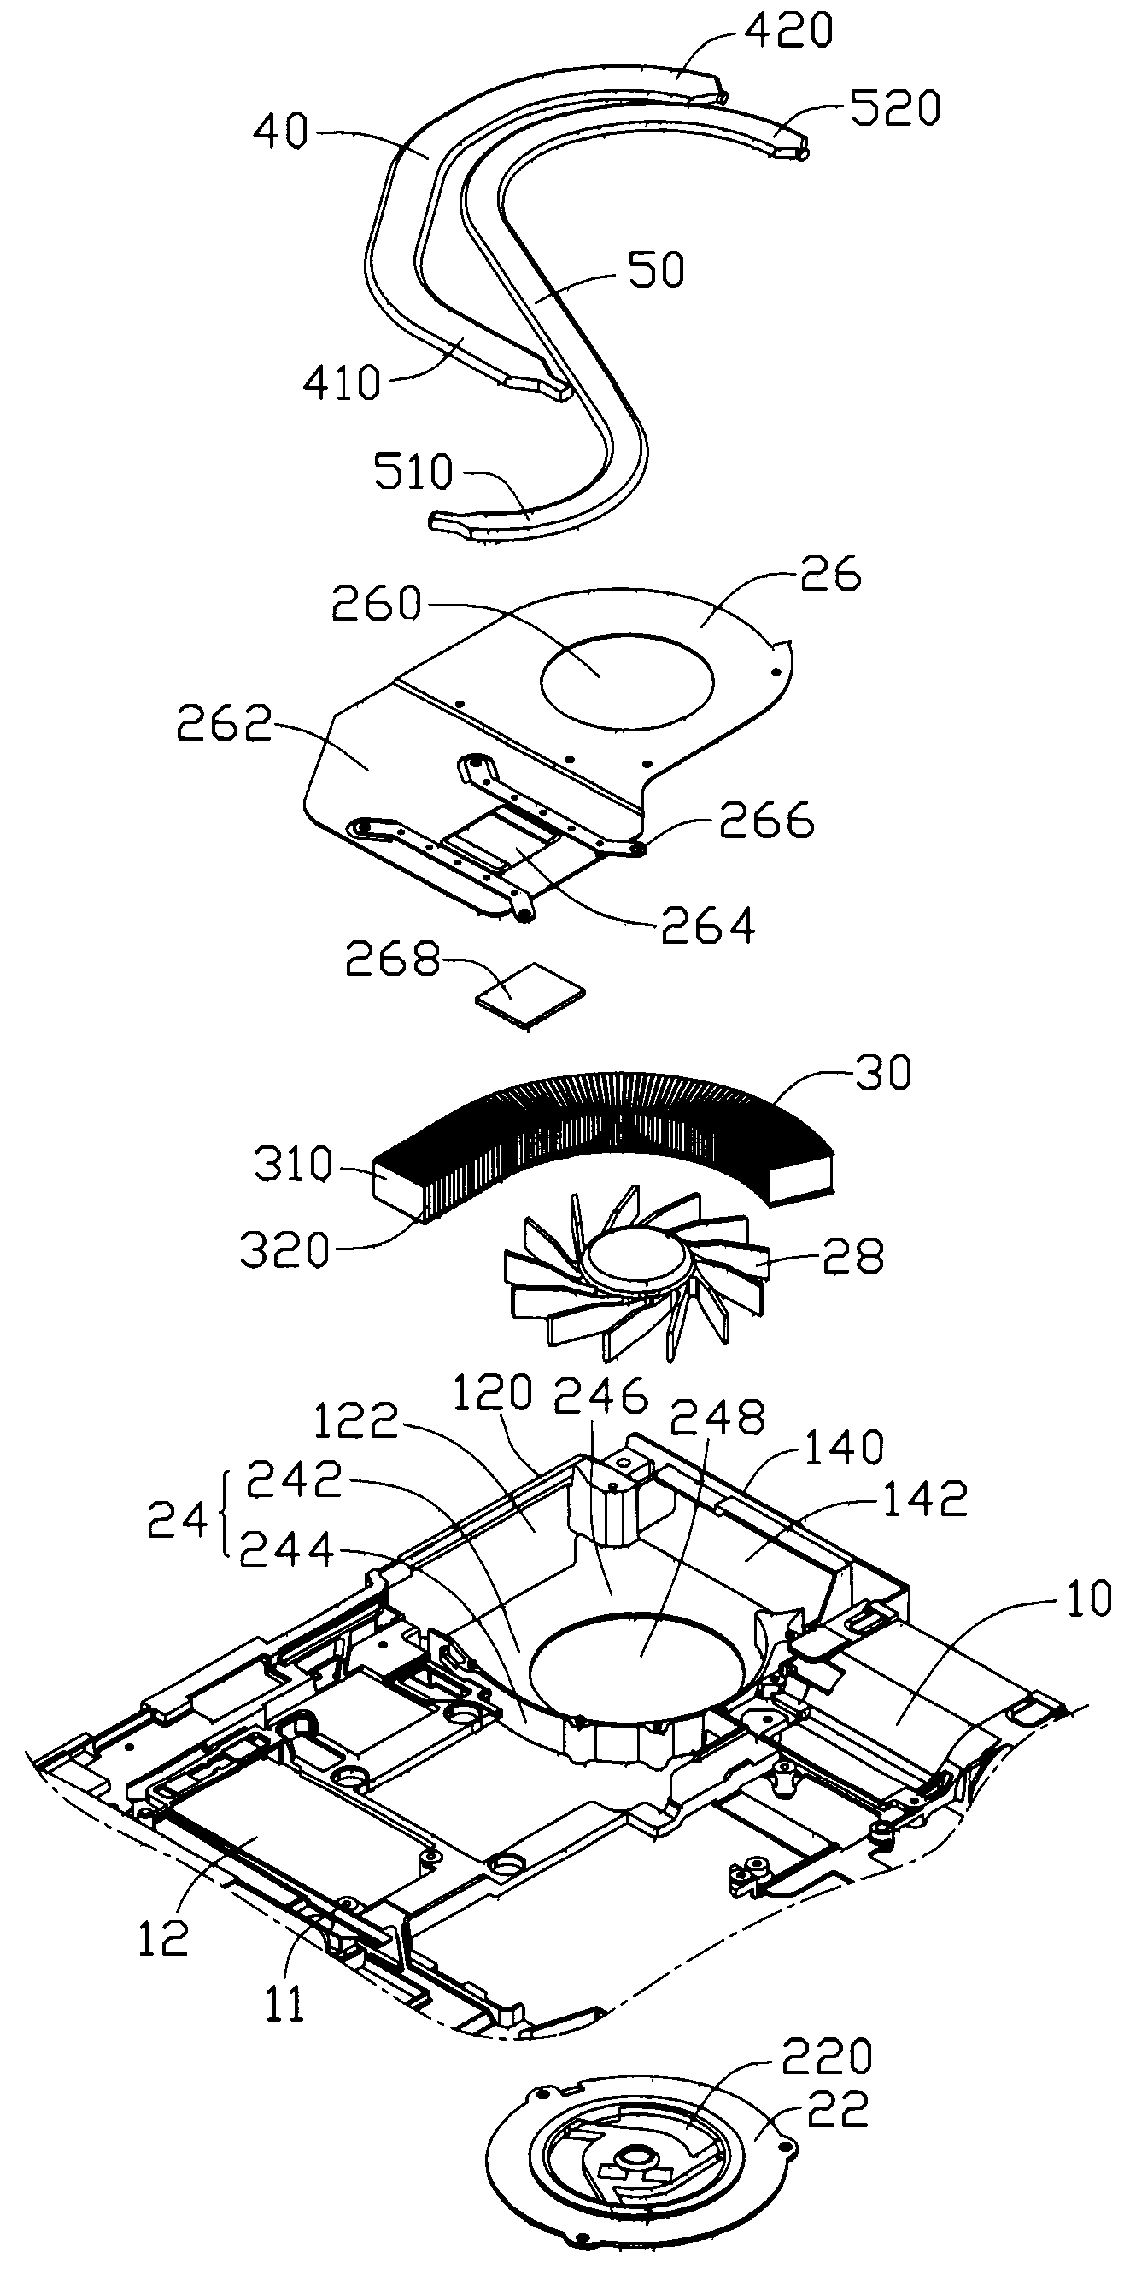 Thermal module having a housing integrally formed with a roll cage of an electronic product